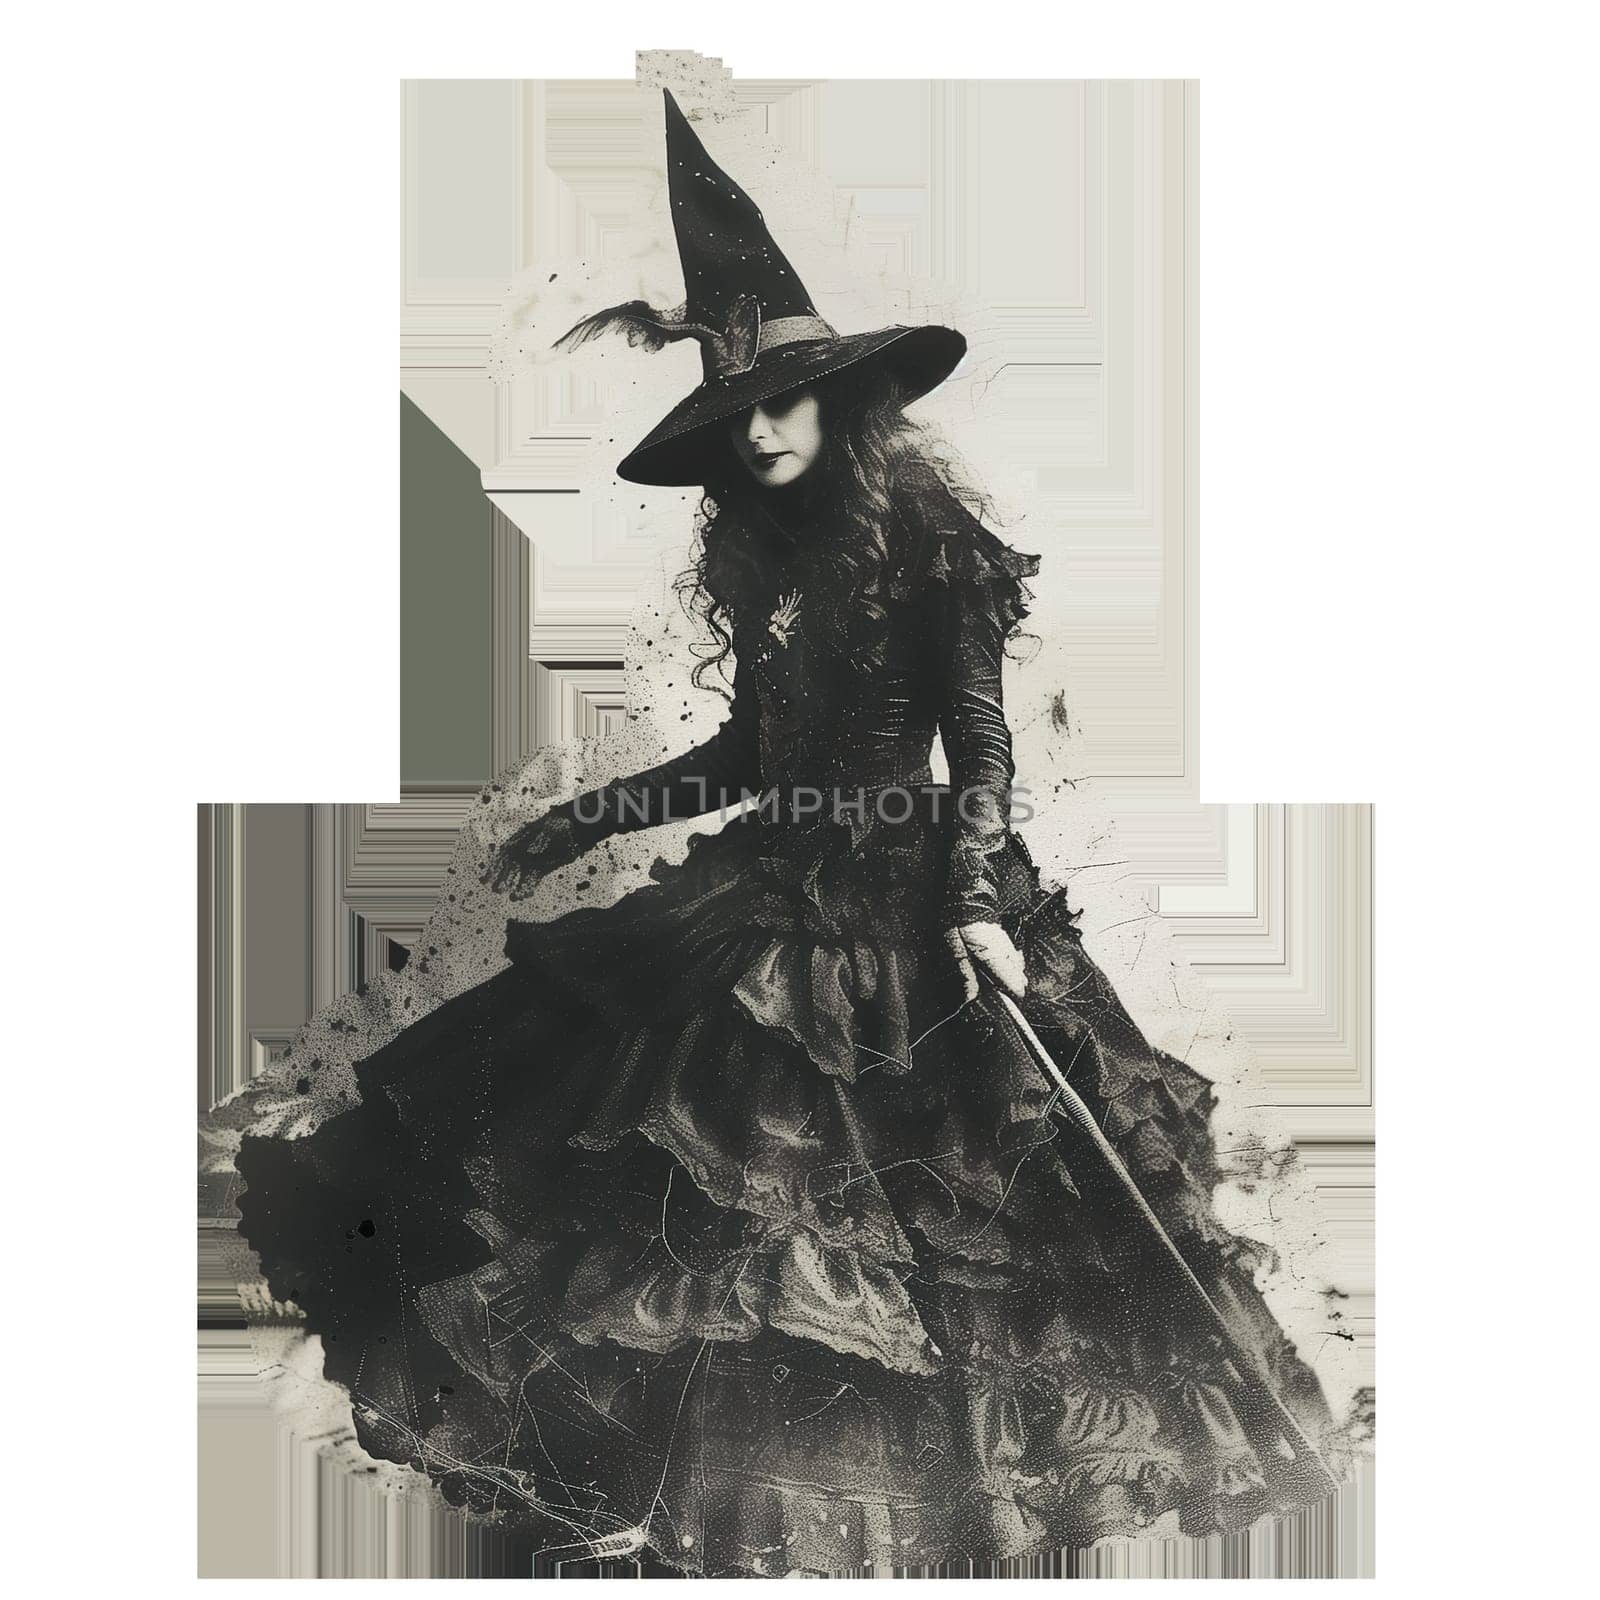 Monochrome vintage photo of halloween witch cut out image by Dustick